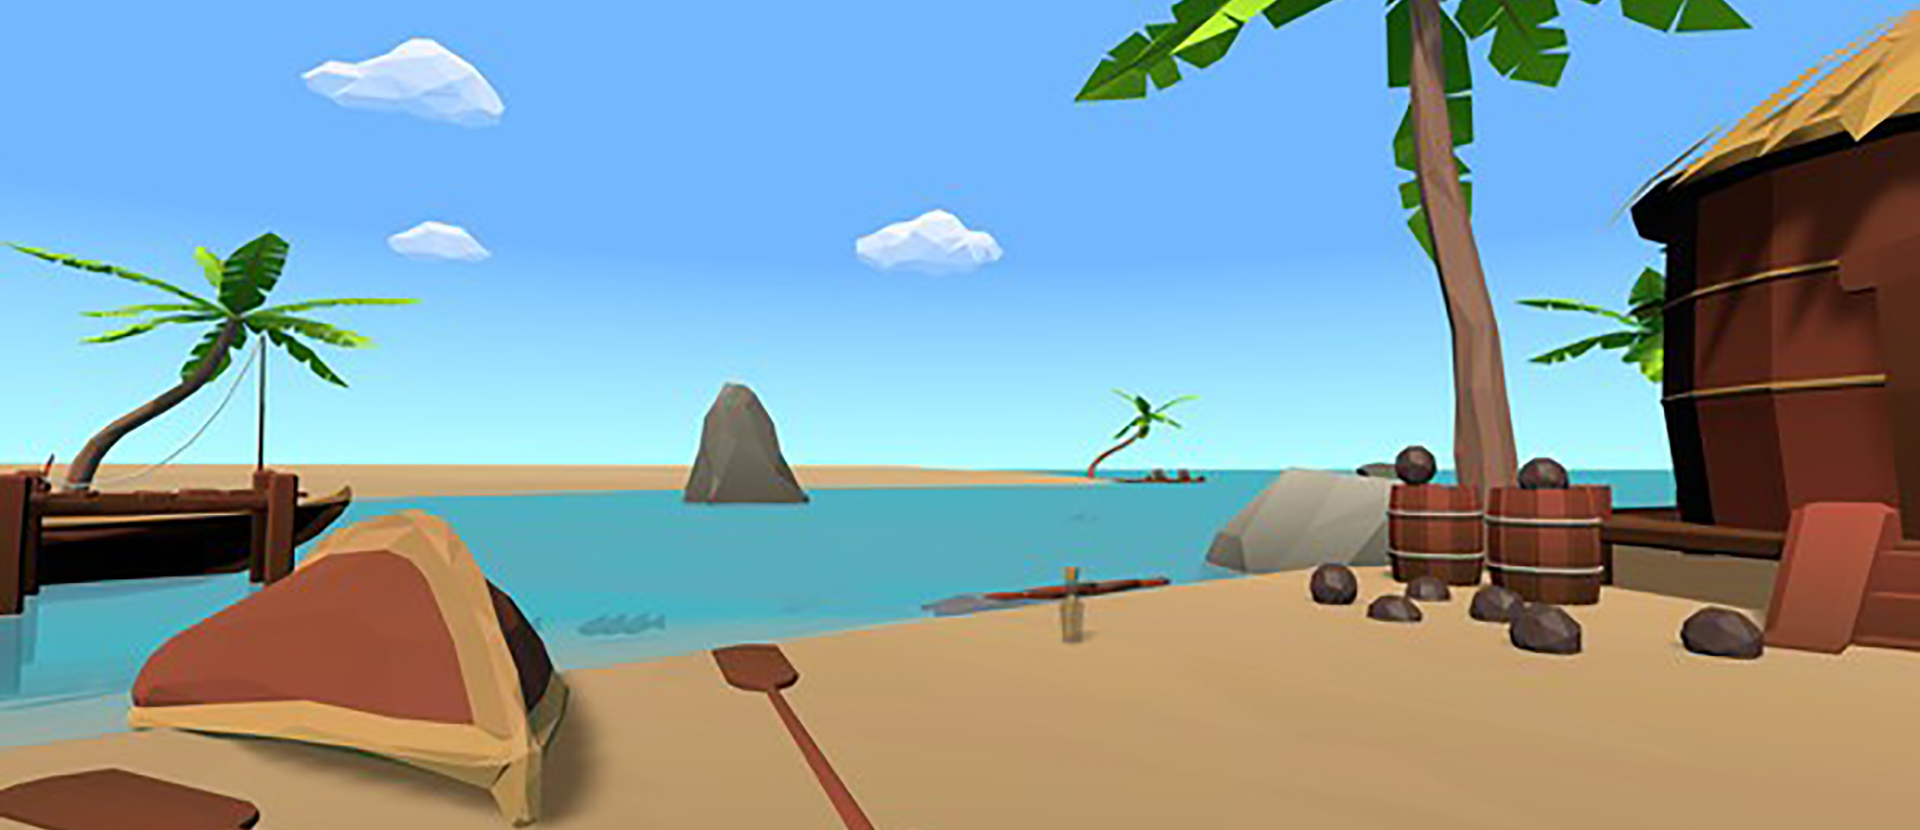 Picture of 'These lands' game showing a scene from the game - desert island scene